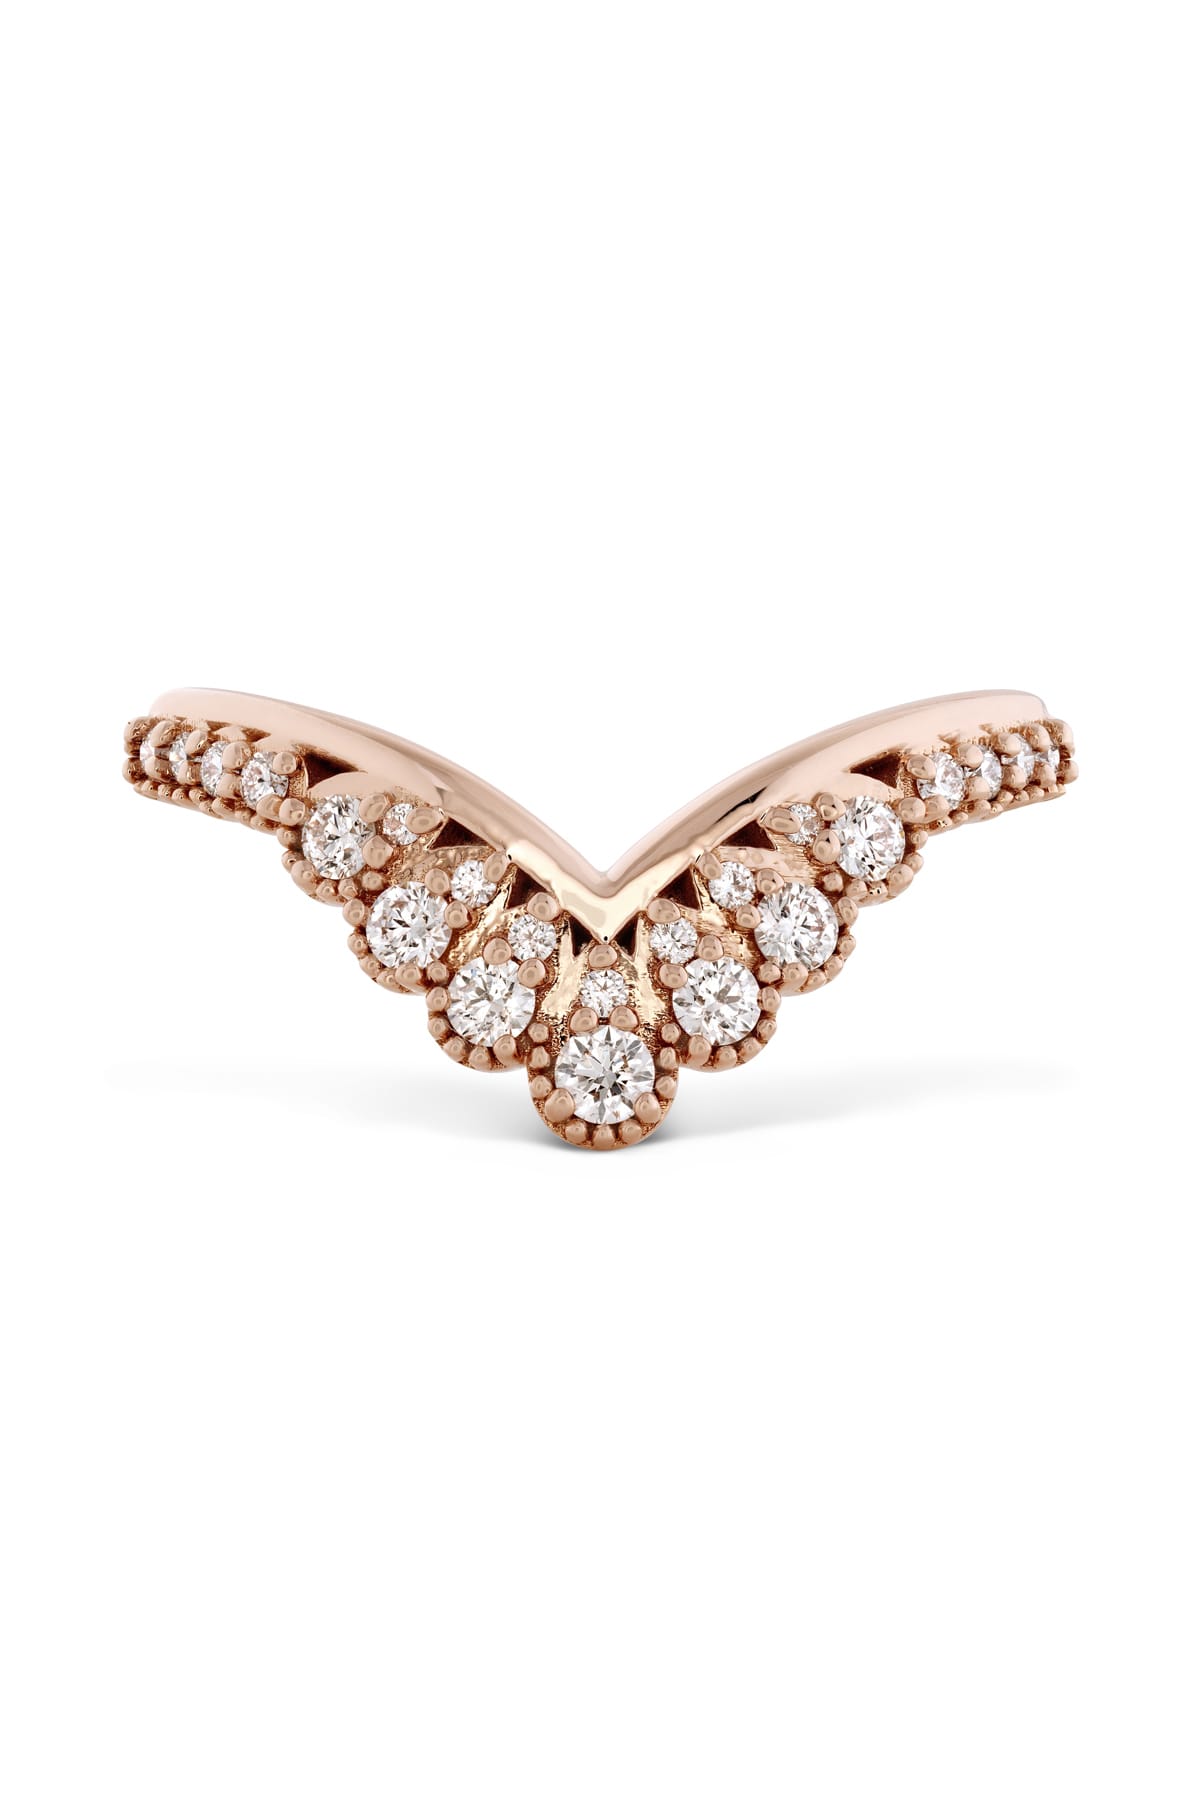 Behati Silhouette Power Band From Hearts On Fire available at LeGassick Diamonds and Jewellery Gold Coast, Australia.